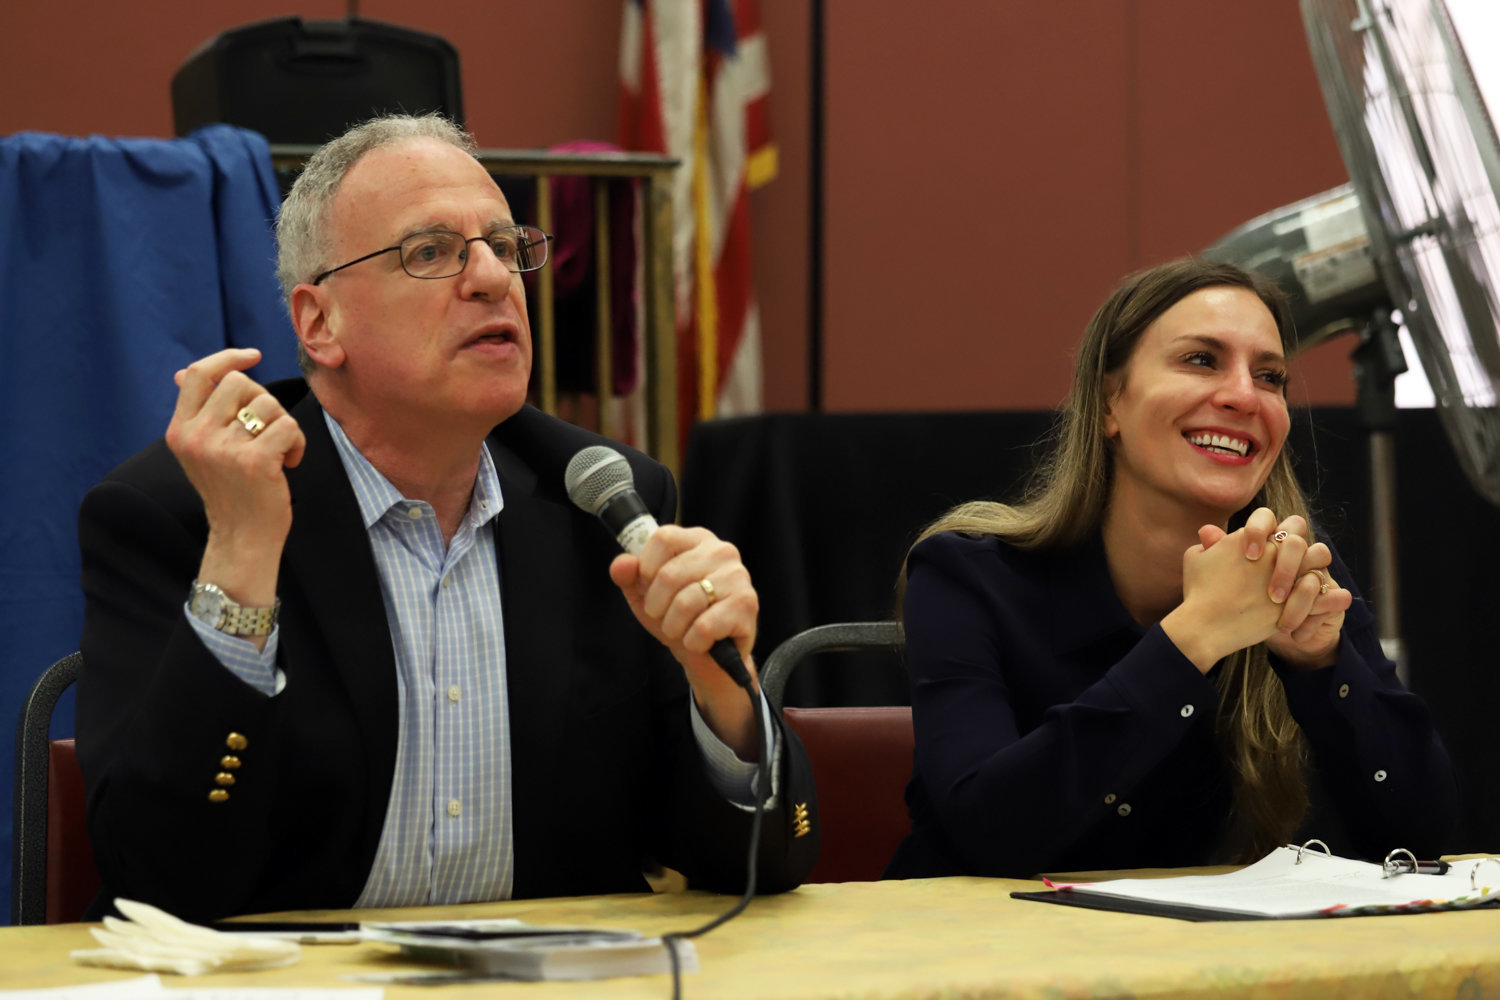 Both Assemblyman Jeffrey Dinowitz and state Sen. Alessandra Biaggi are working on legislation that will allow people to continue voting, even during coronavirus crisis concerns.